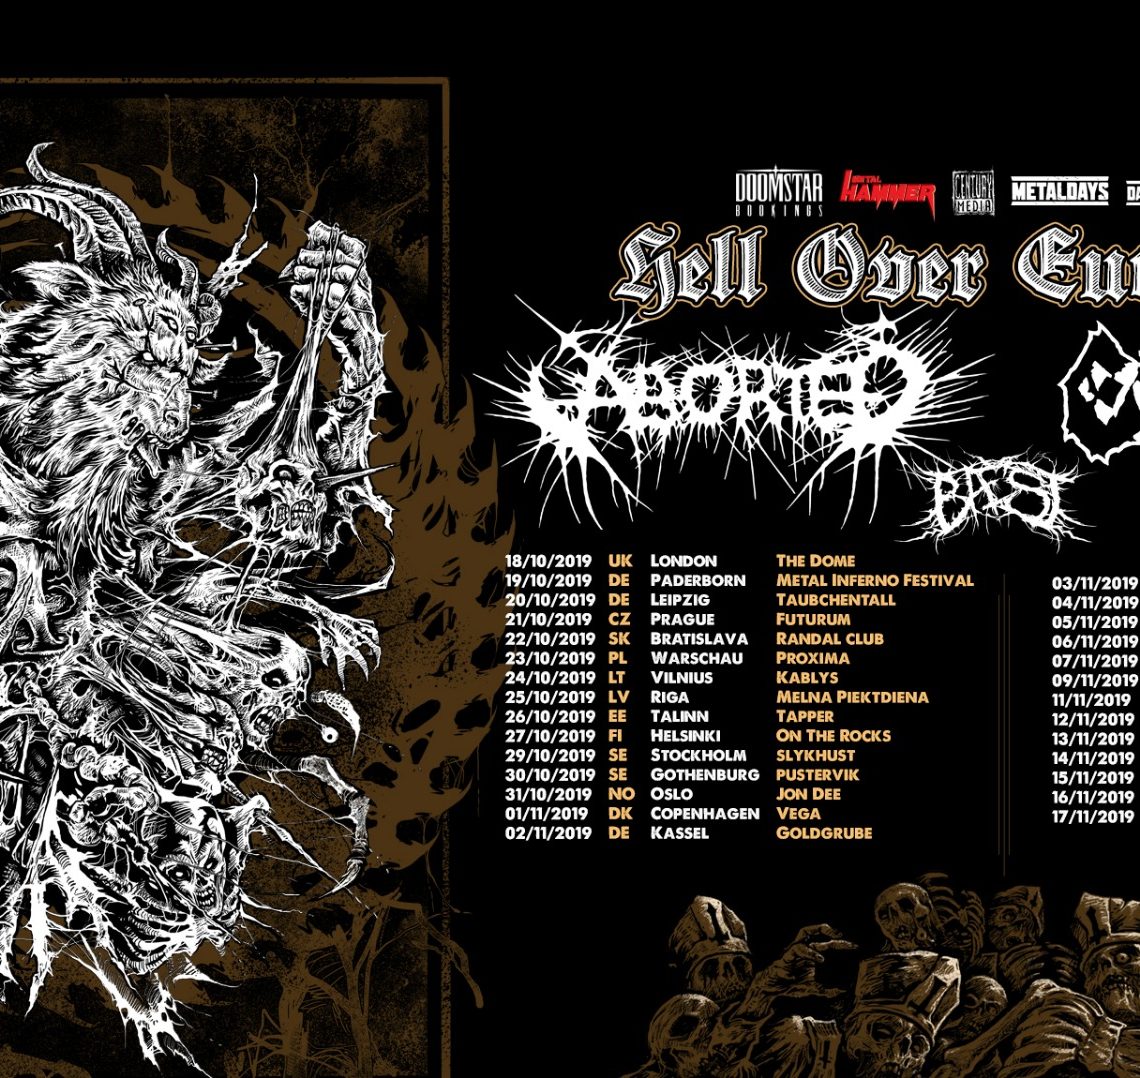 Century Media Records Artists ABORTED, ENTOMBED A.D. and BAEST Team Up For “Hell Over Europe III” Tour